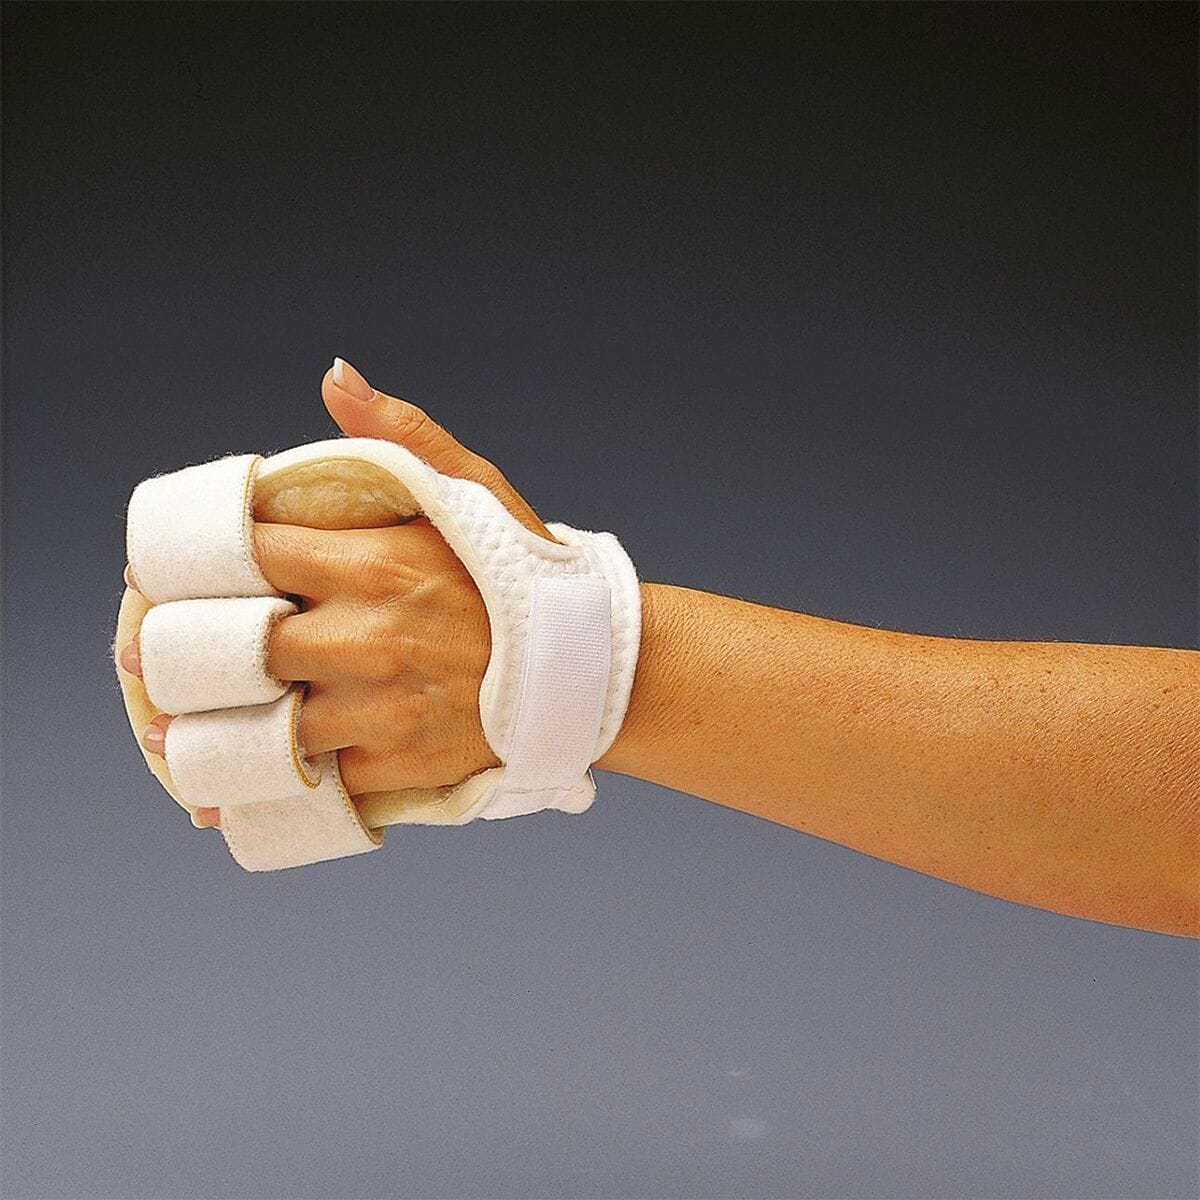 View Positioning Splint Palm ProtectorFinger Left Hand information